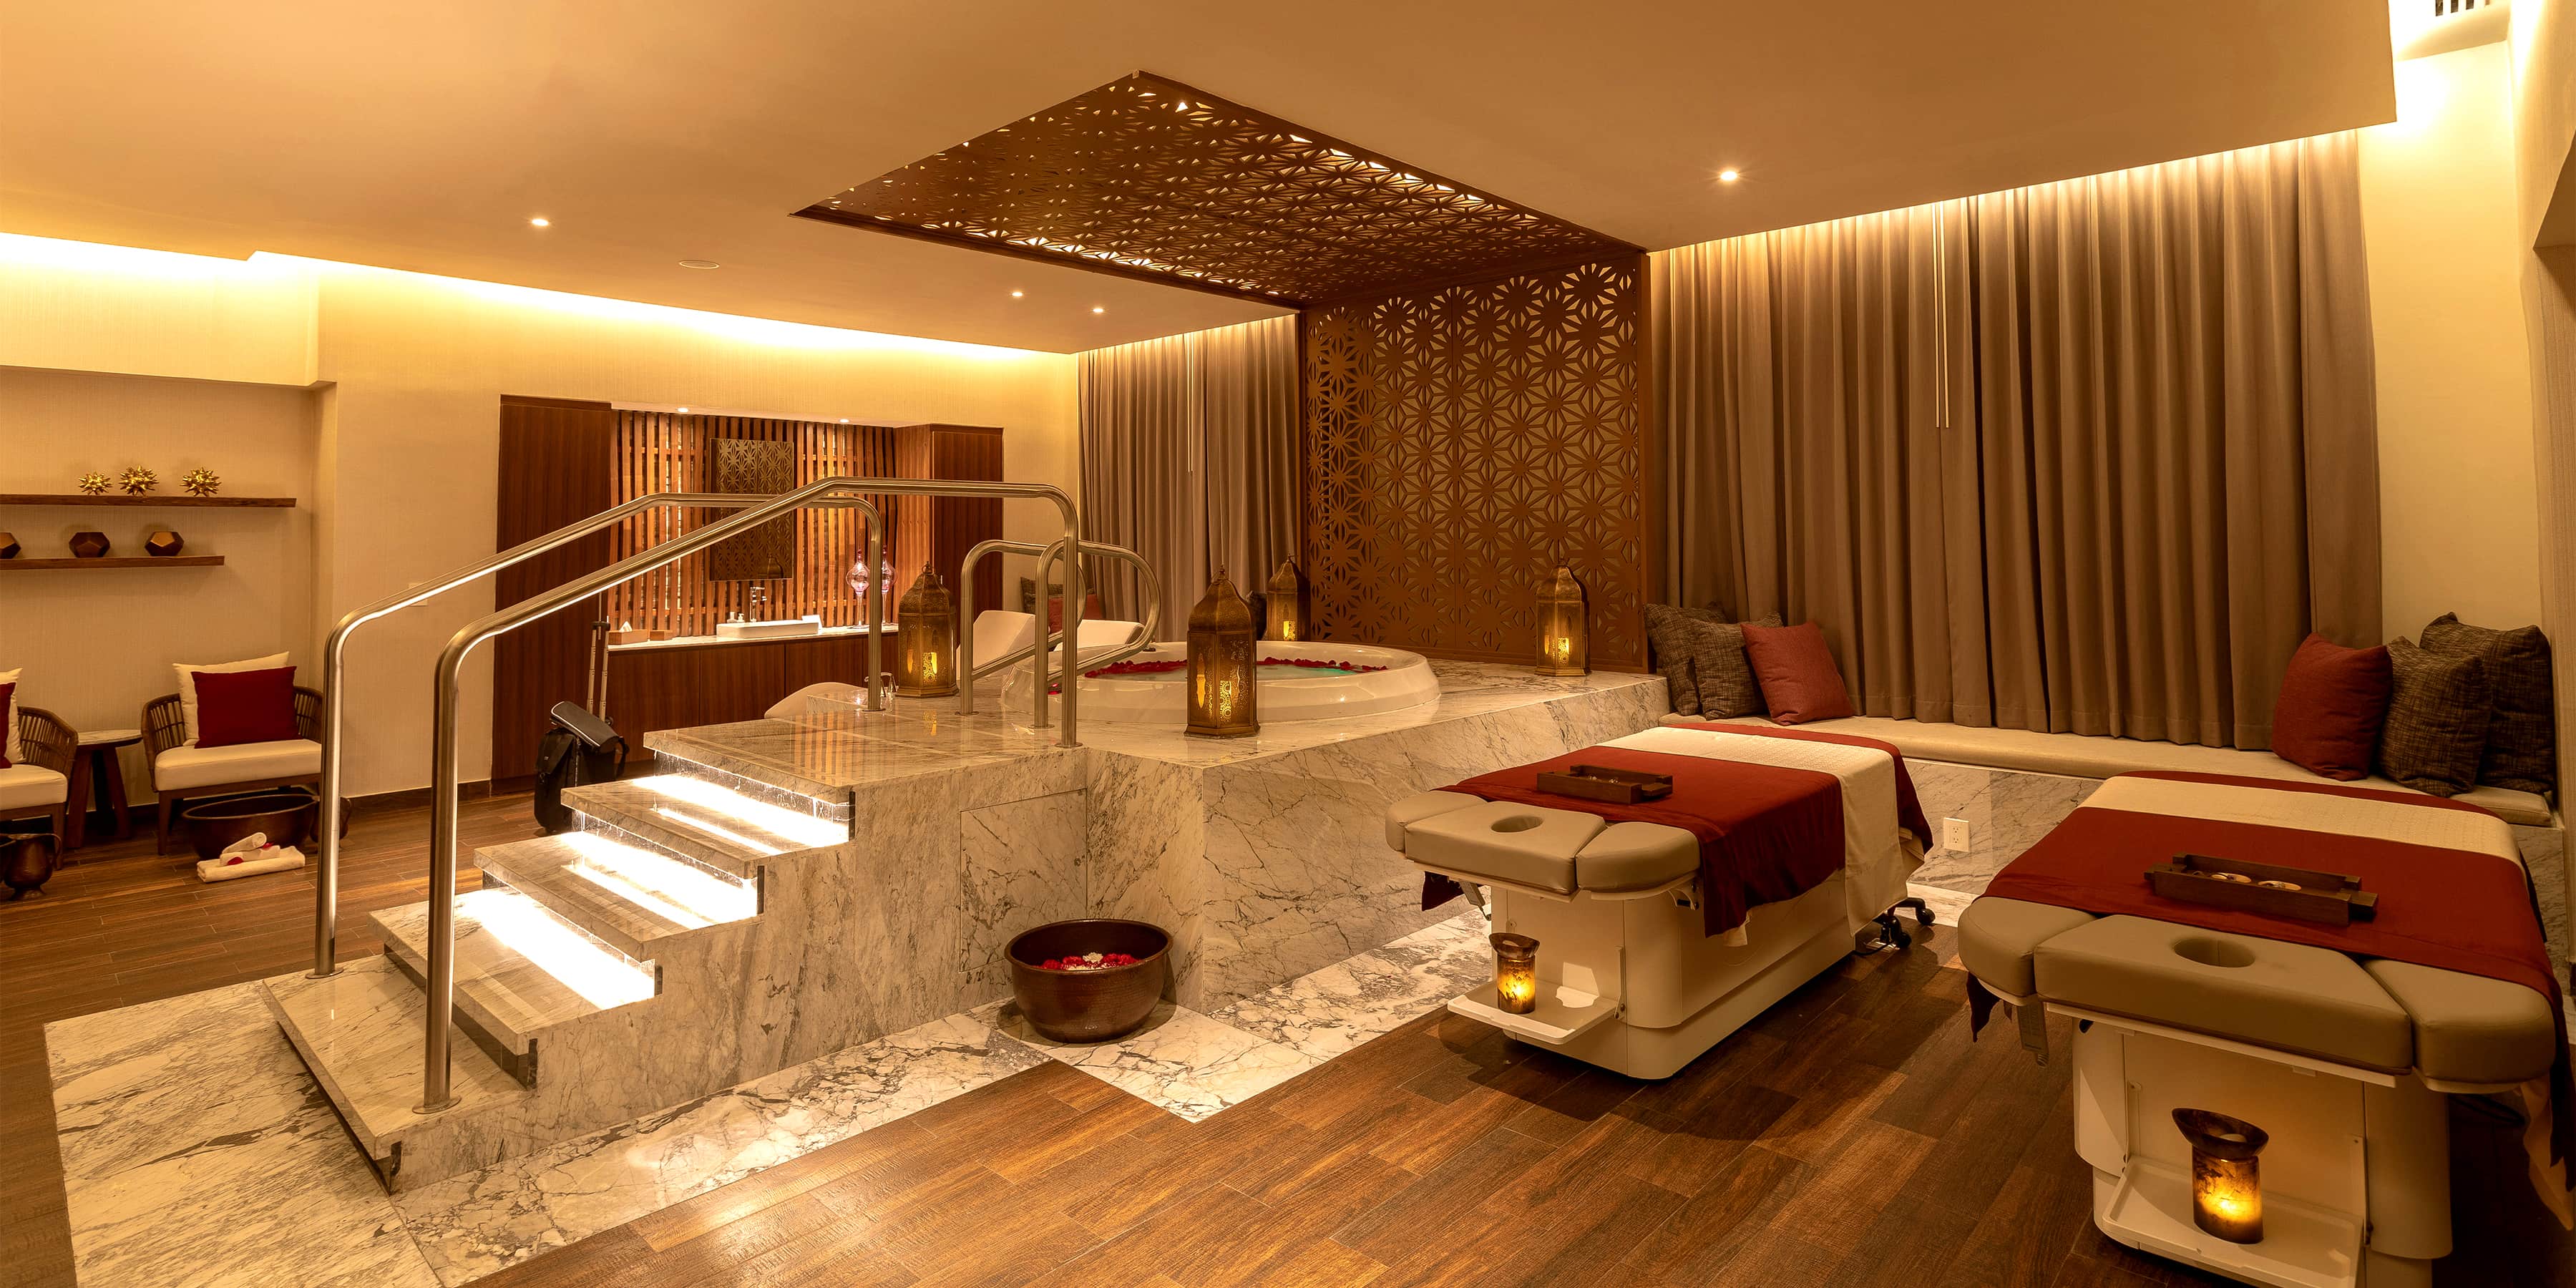 kong foo spa ajman: all you need to know (service, review, price ,contact information)